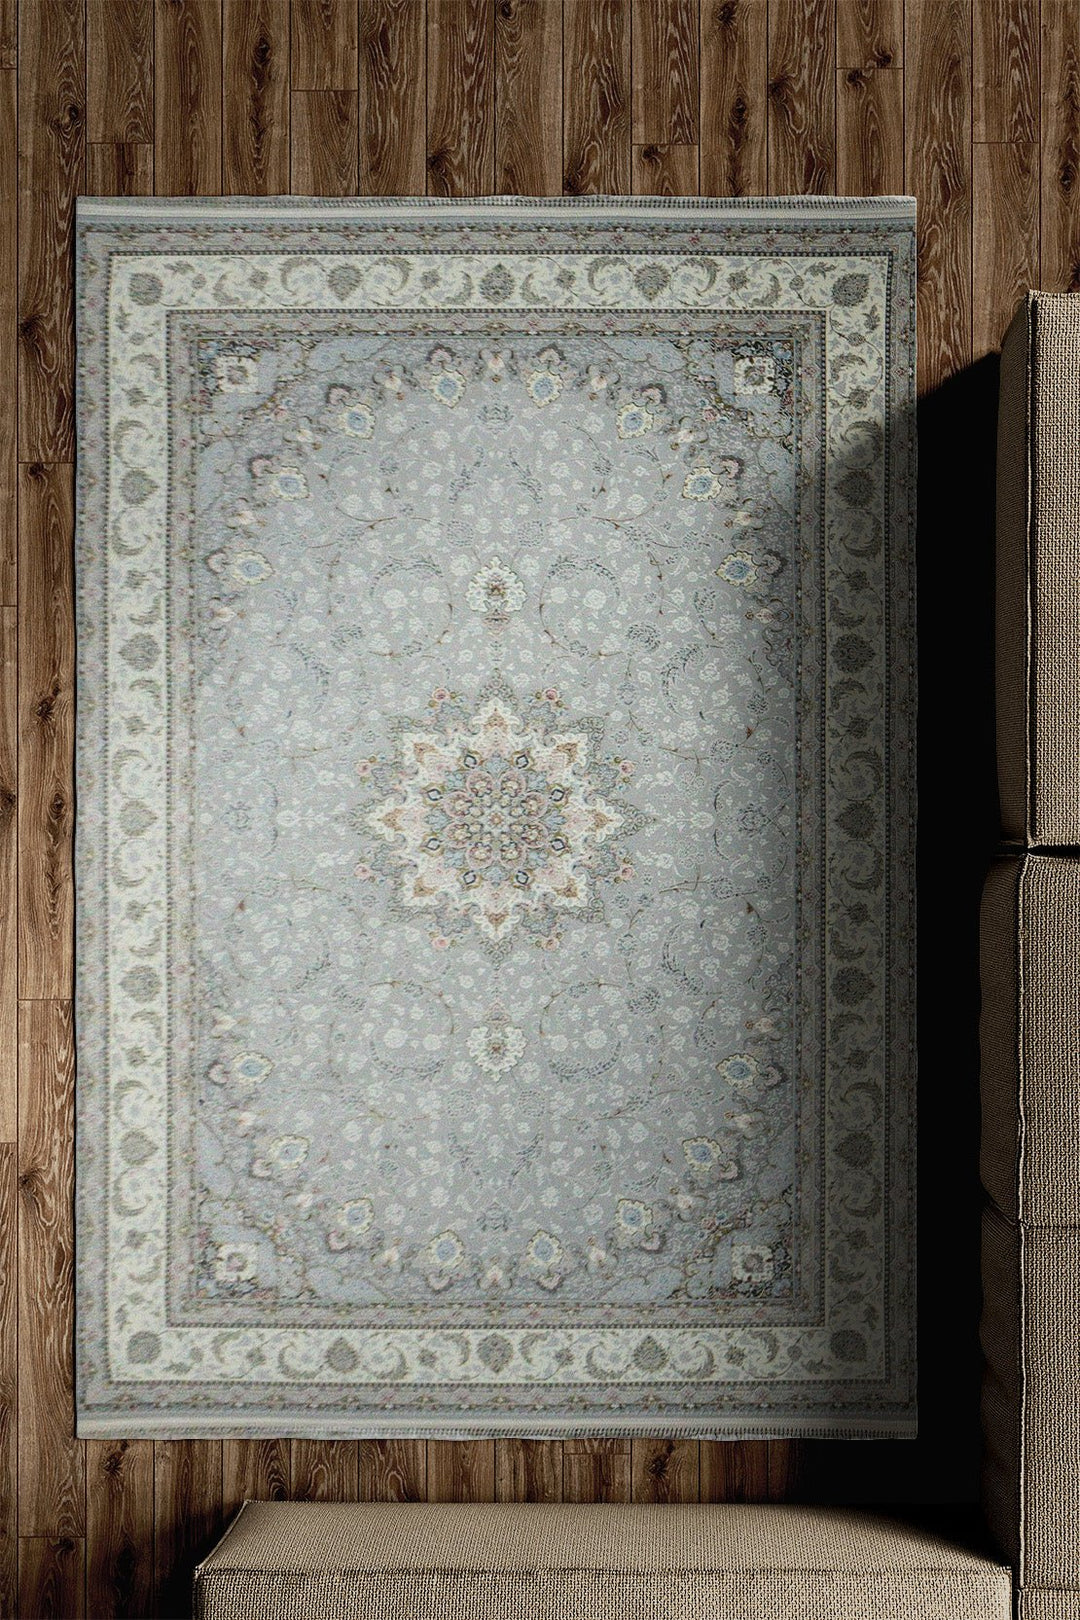 Iranian Premium Quality Authentic 1500 Rug - 4.9 x 7.3 FT - Gray and Cream - Resilient Construction for Long-Lasting Use - V Surfaces